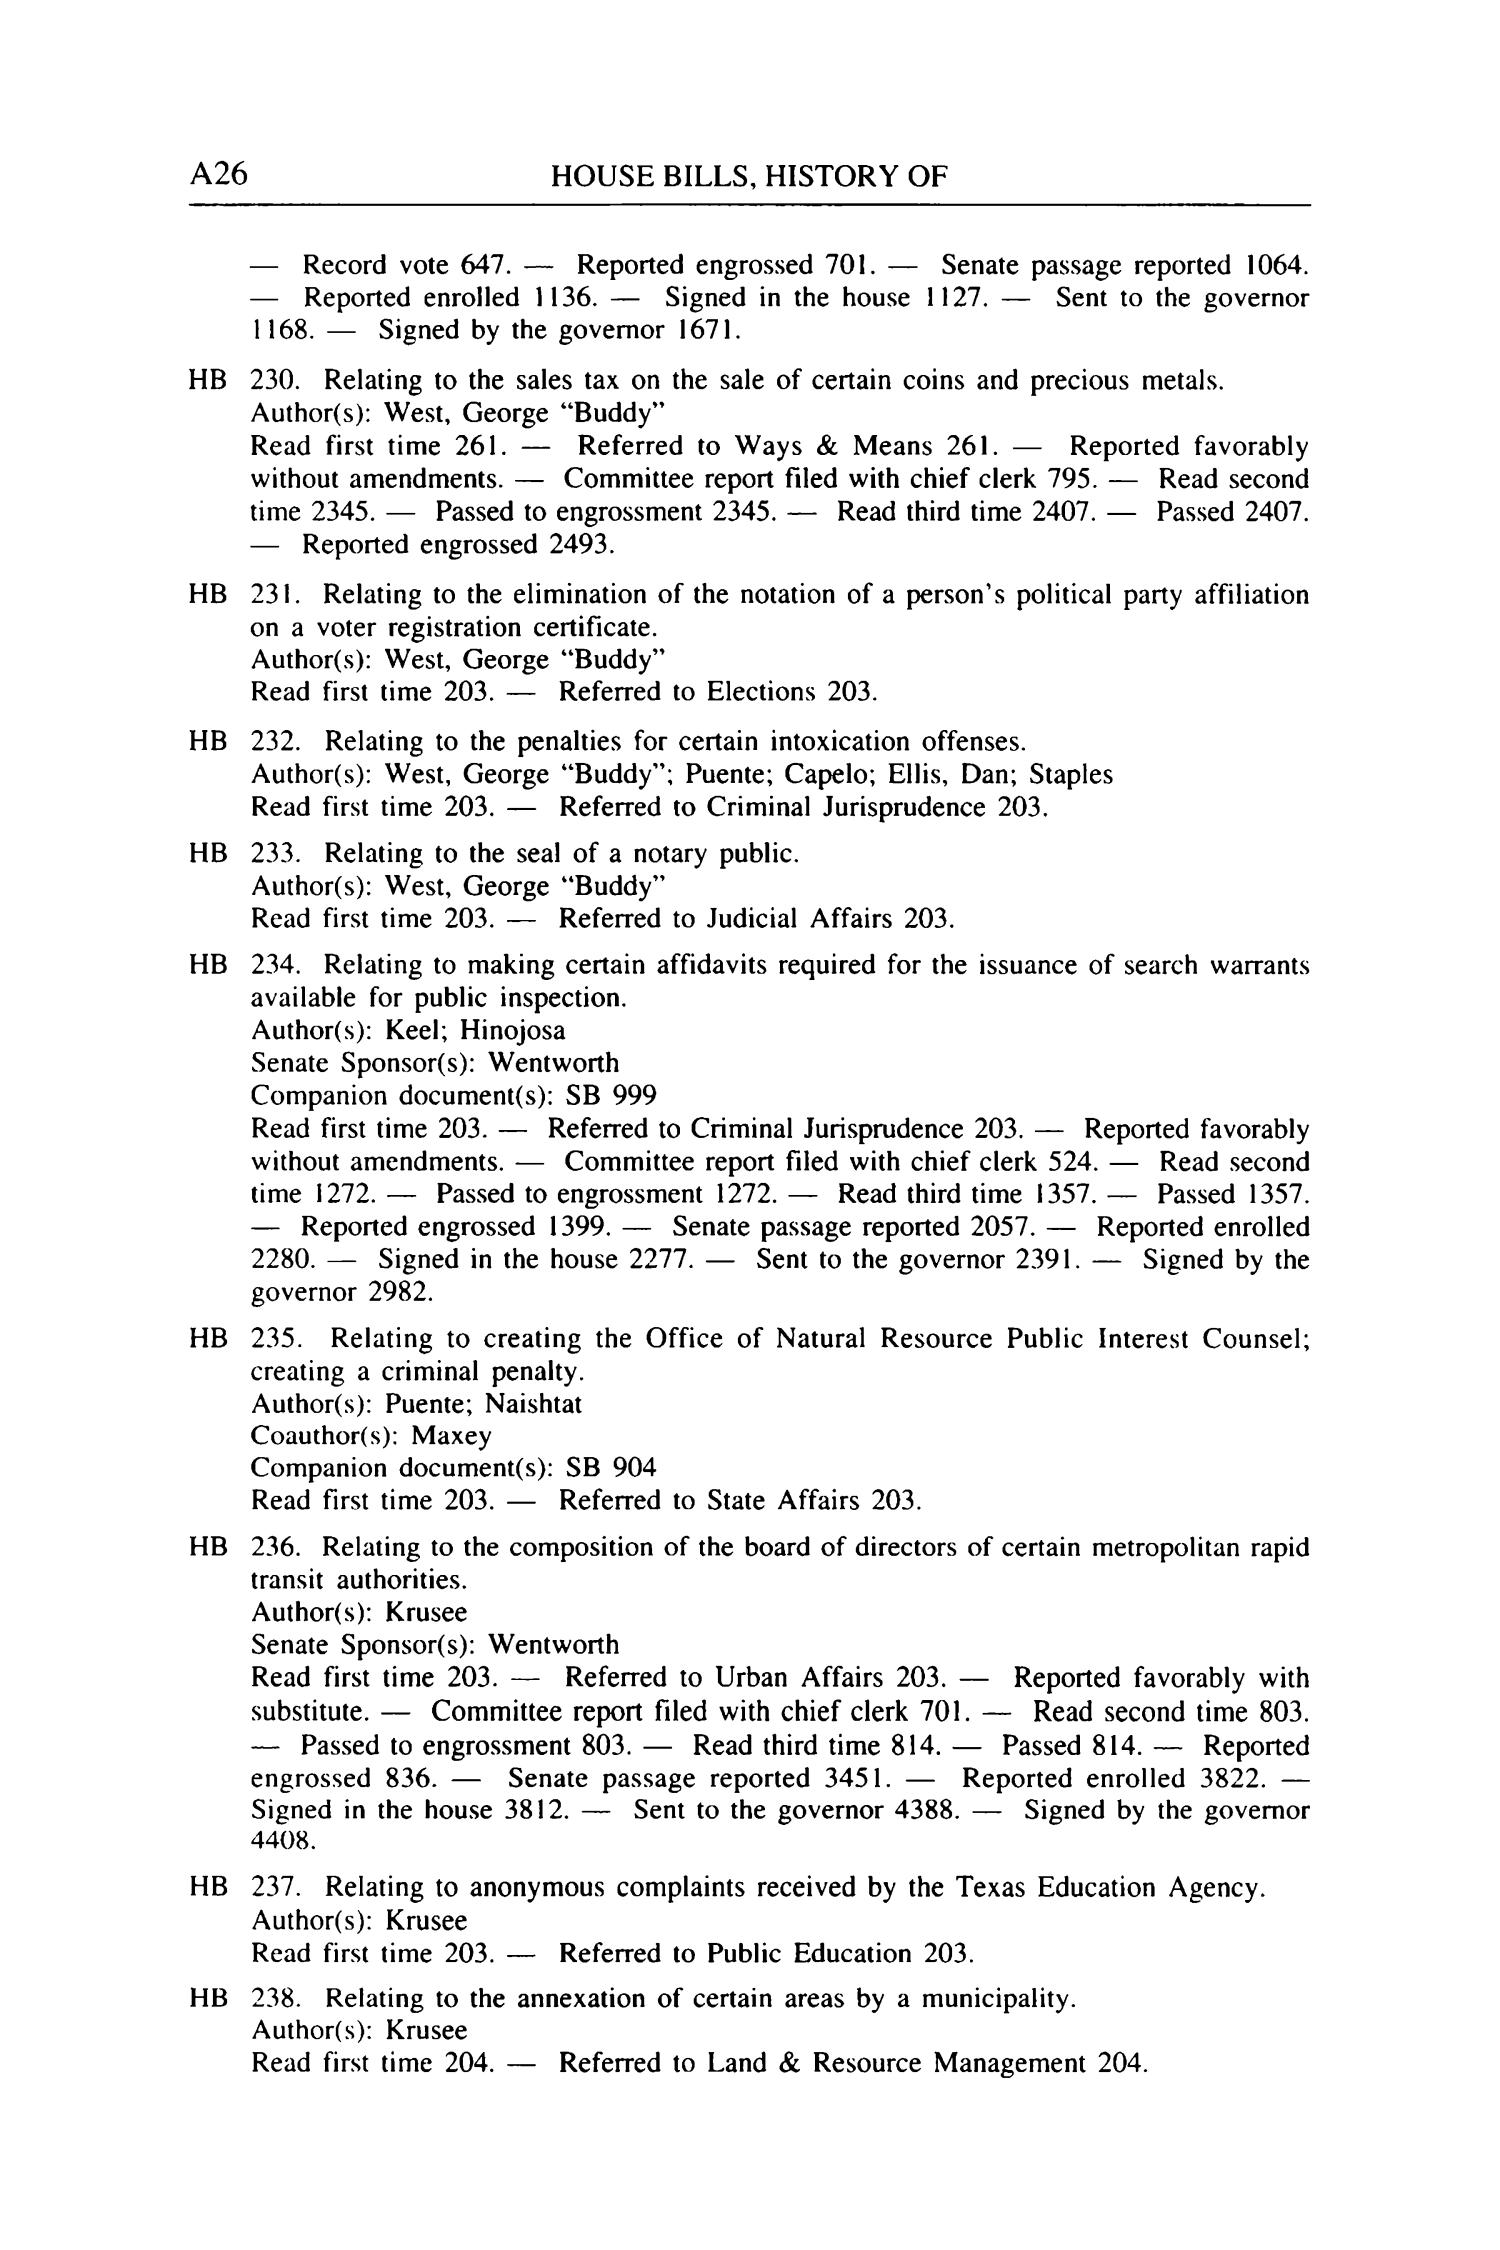 Journal of the House of Representatives of the Regular Session of the Seventy-Sixth Legislature of the State of Texas, Volume 5
                                                
                                                    A26
                                                